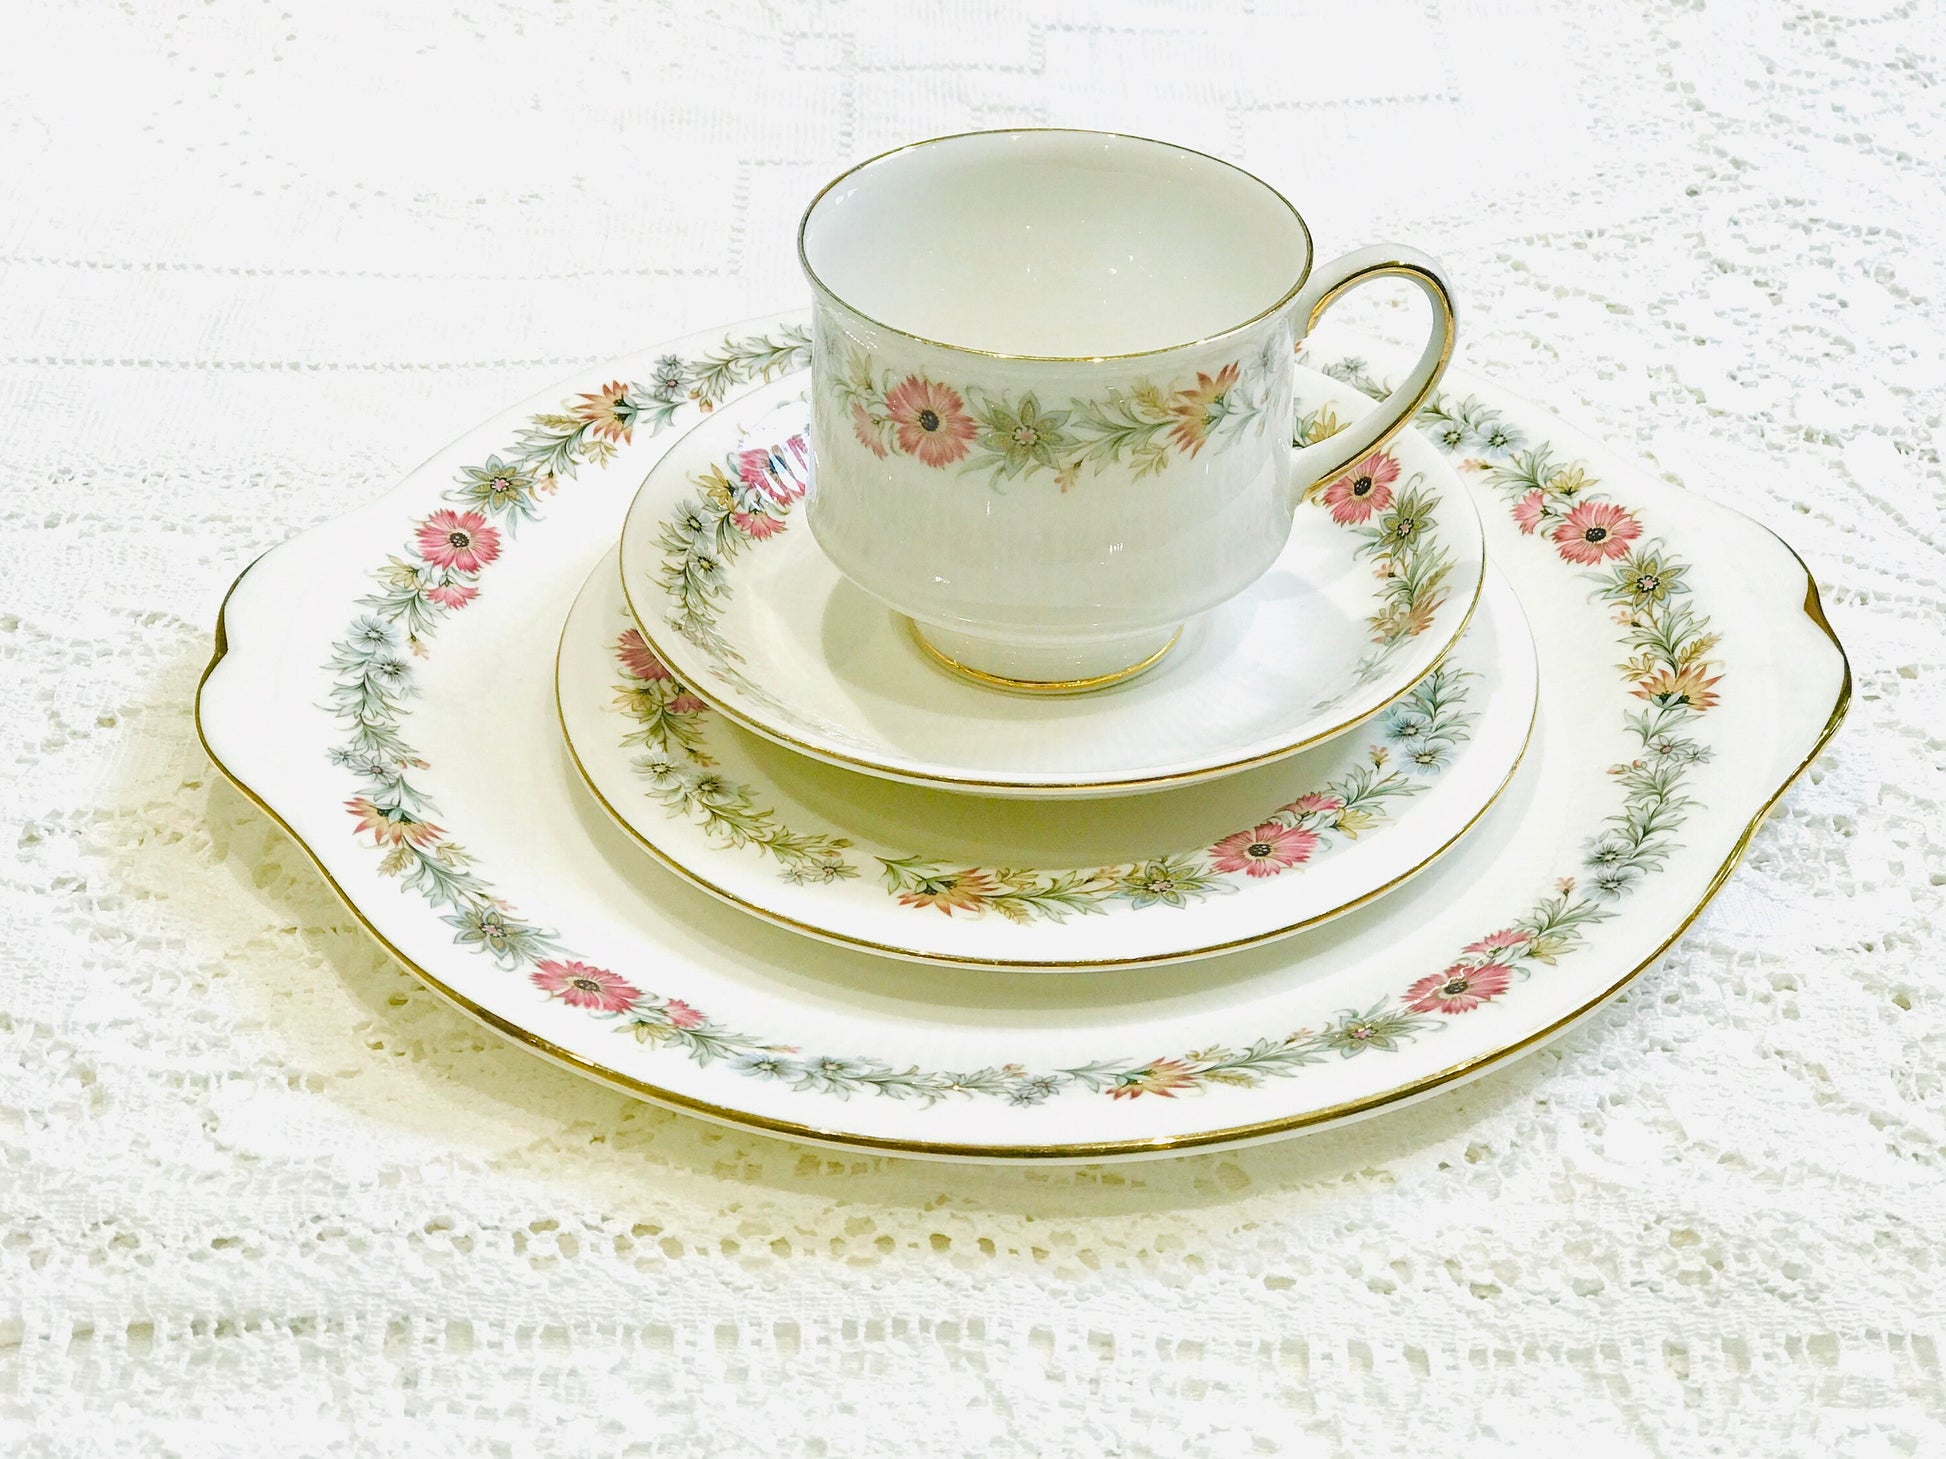 Paragon Belinda Tea cup and saucer trio white/pink flowers English vintage fine bone china for Afternoon tea